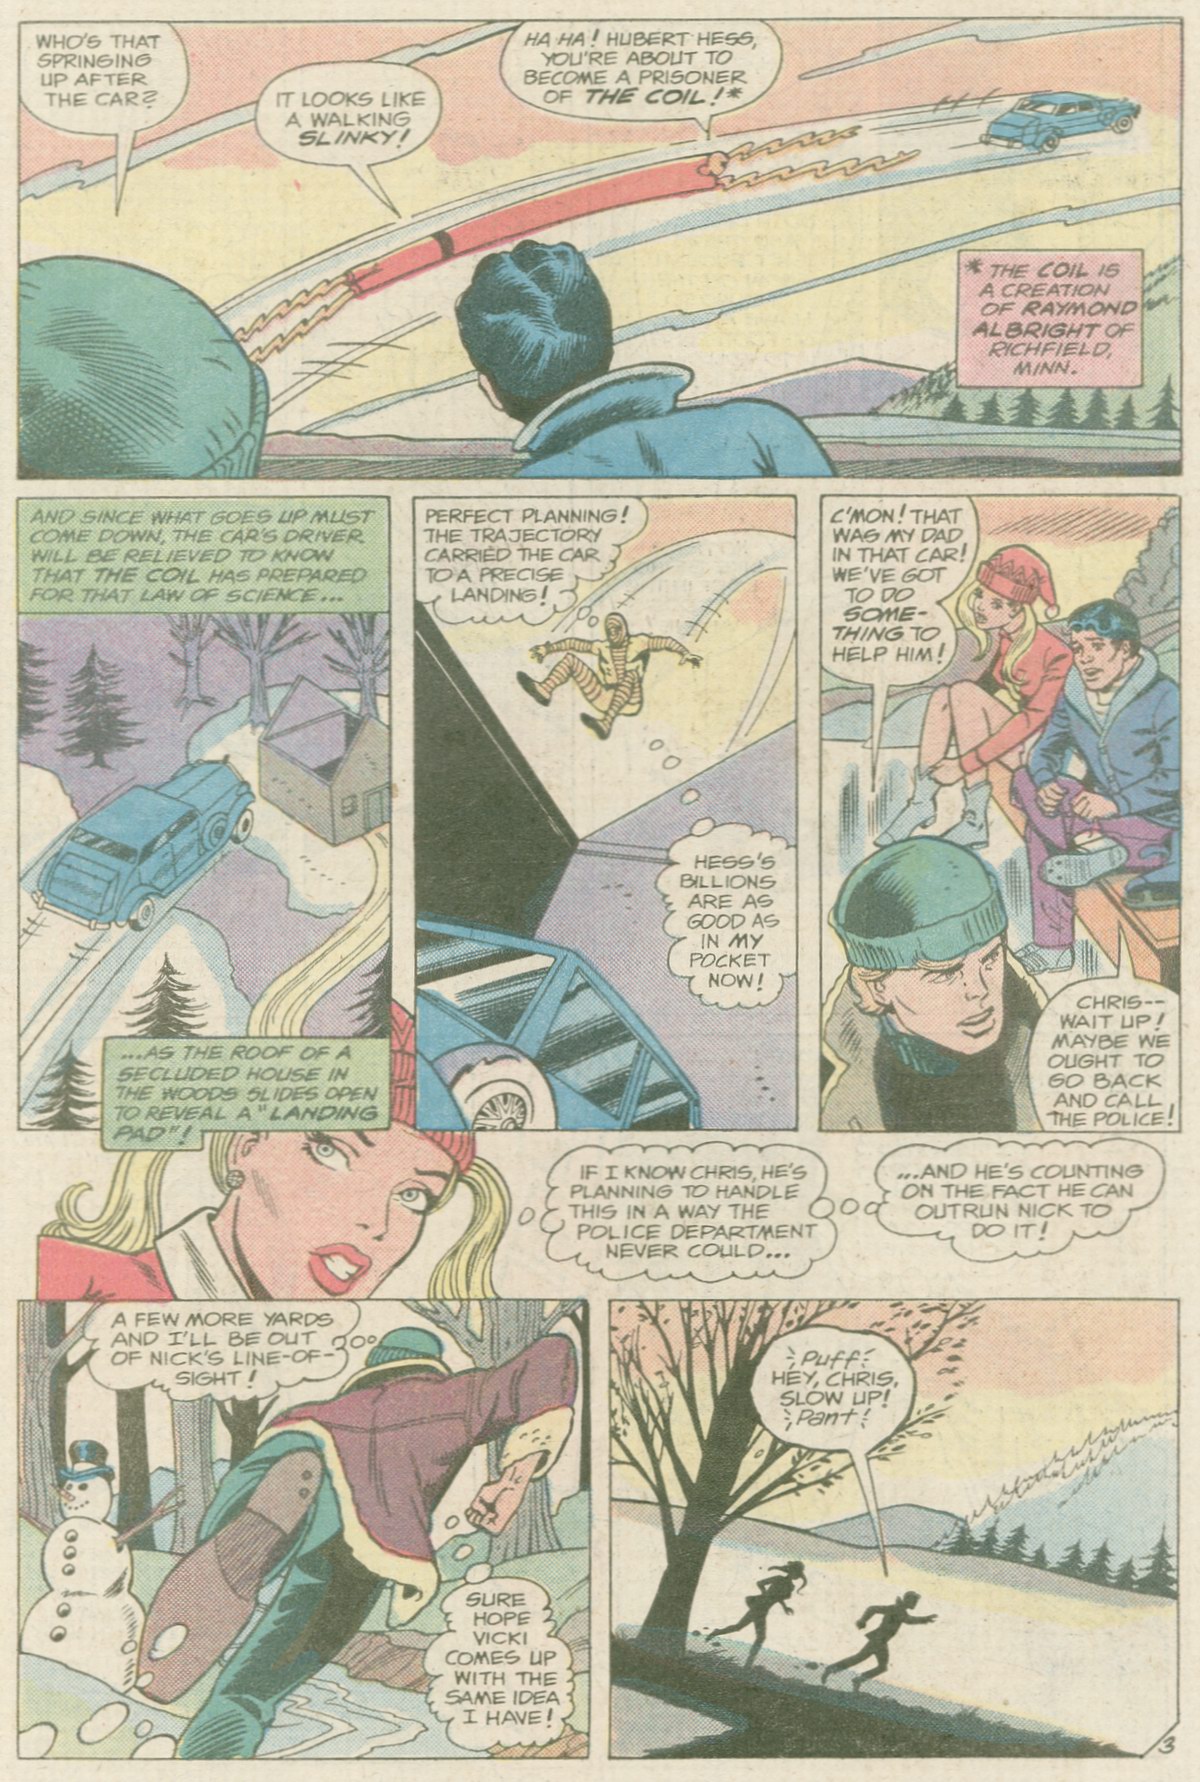 The New Adventures of Superboy 40 Page 20